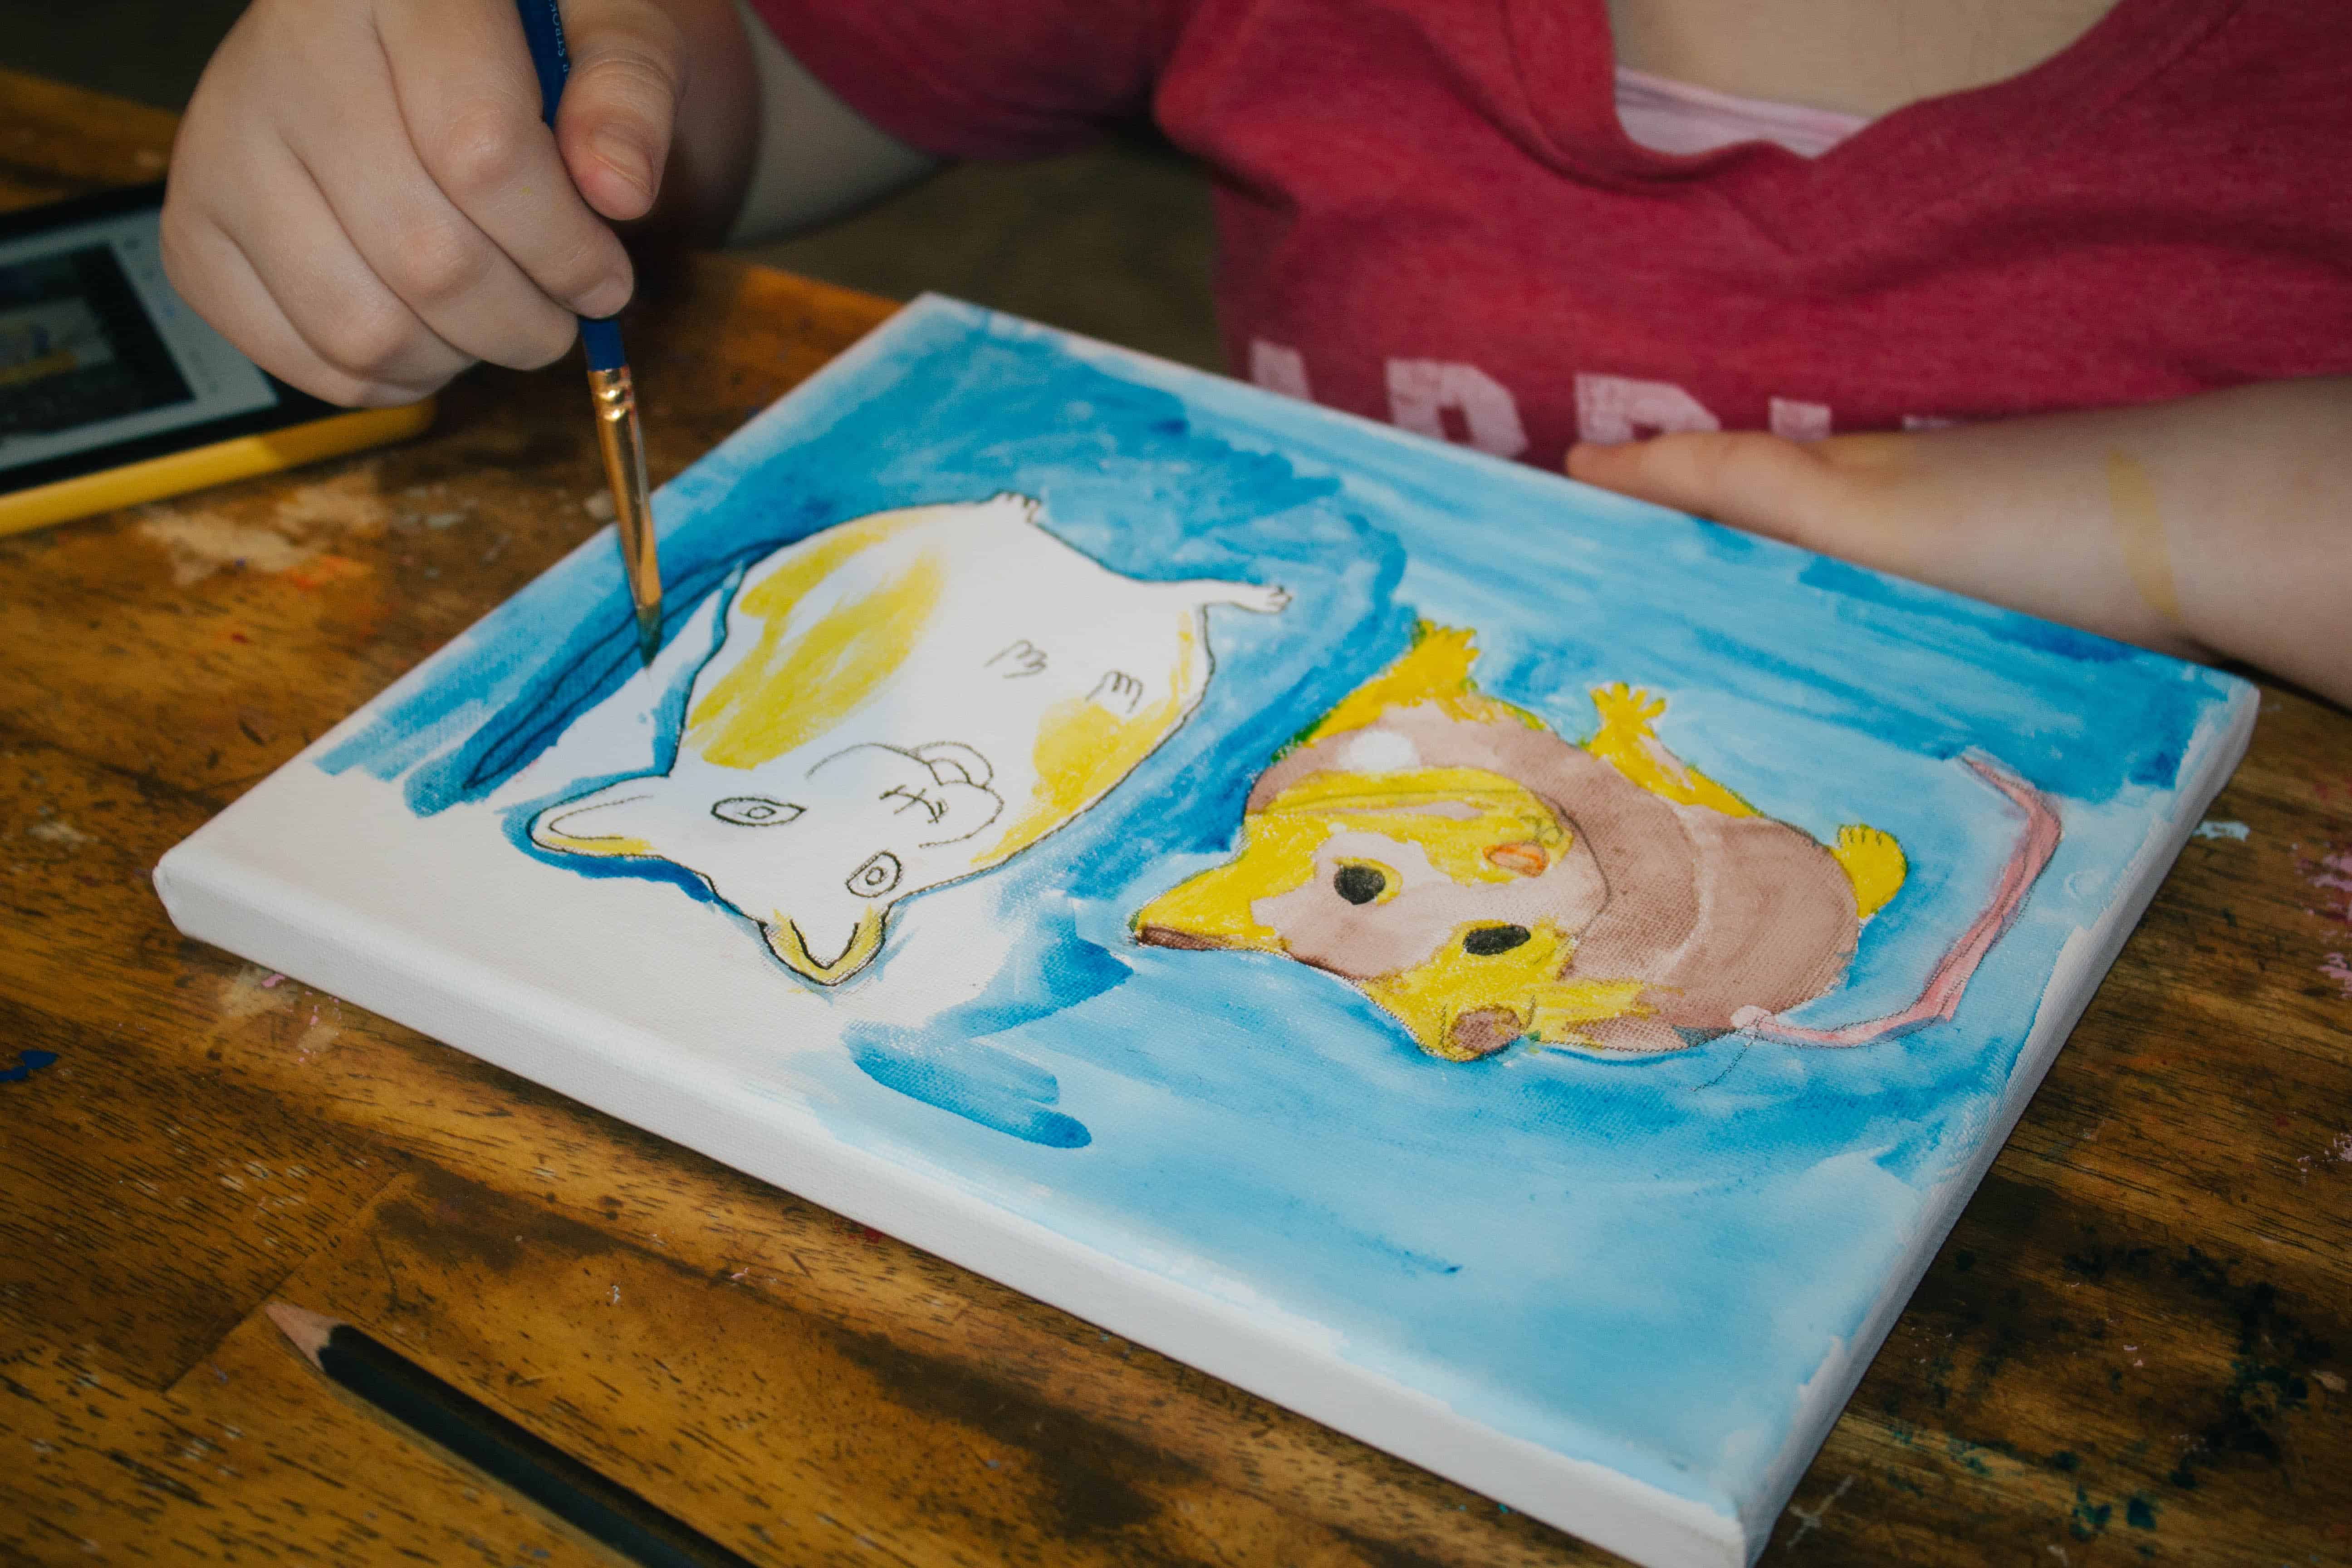 Check out some of my favorite paintings me and my kiddos have created using Masterpiece Society!